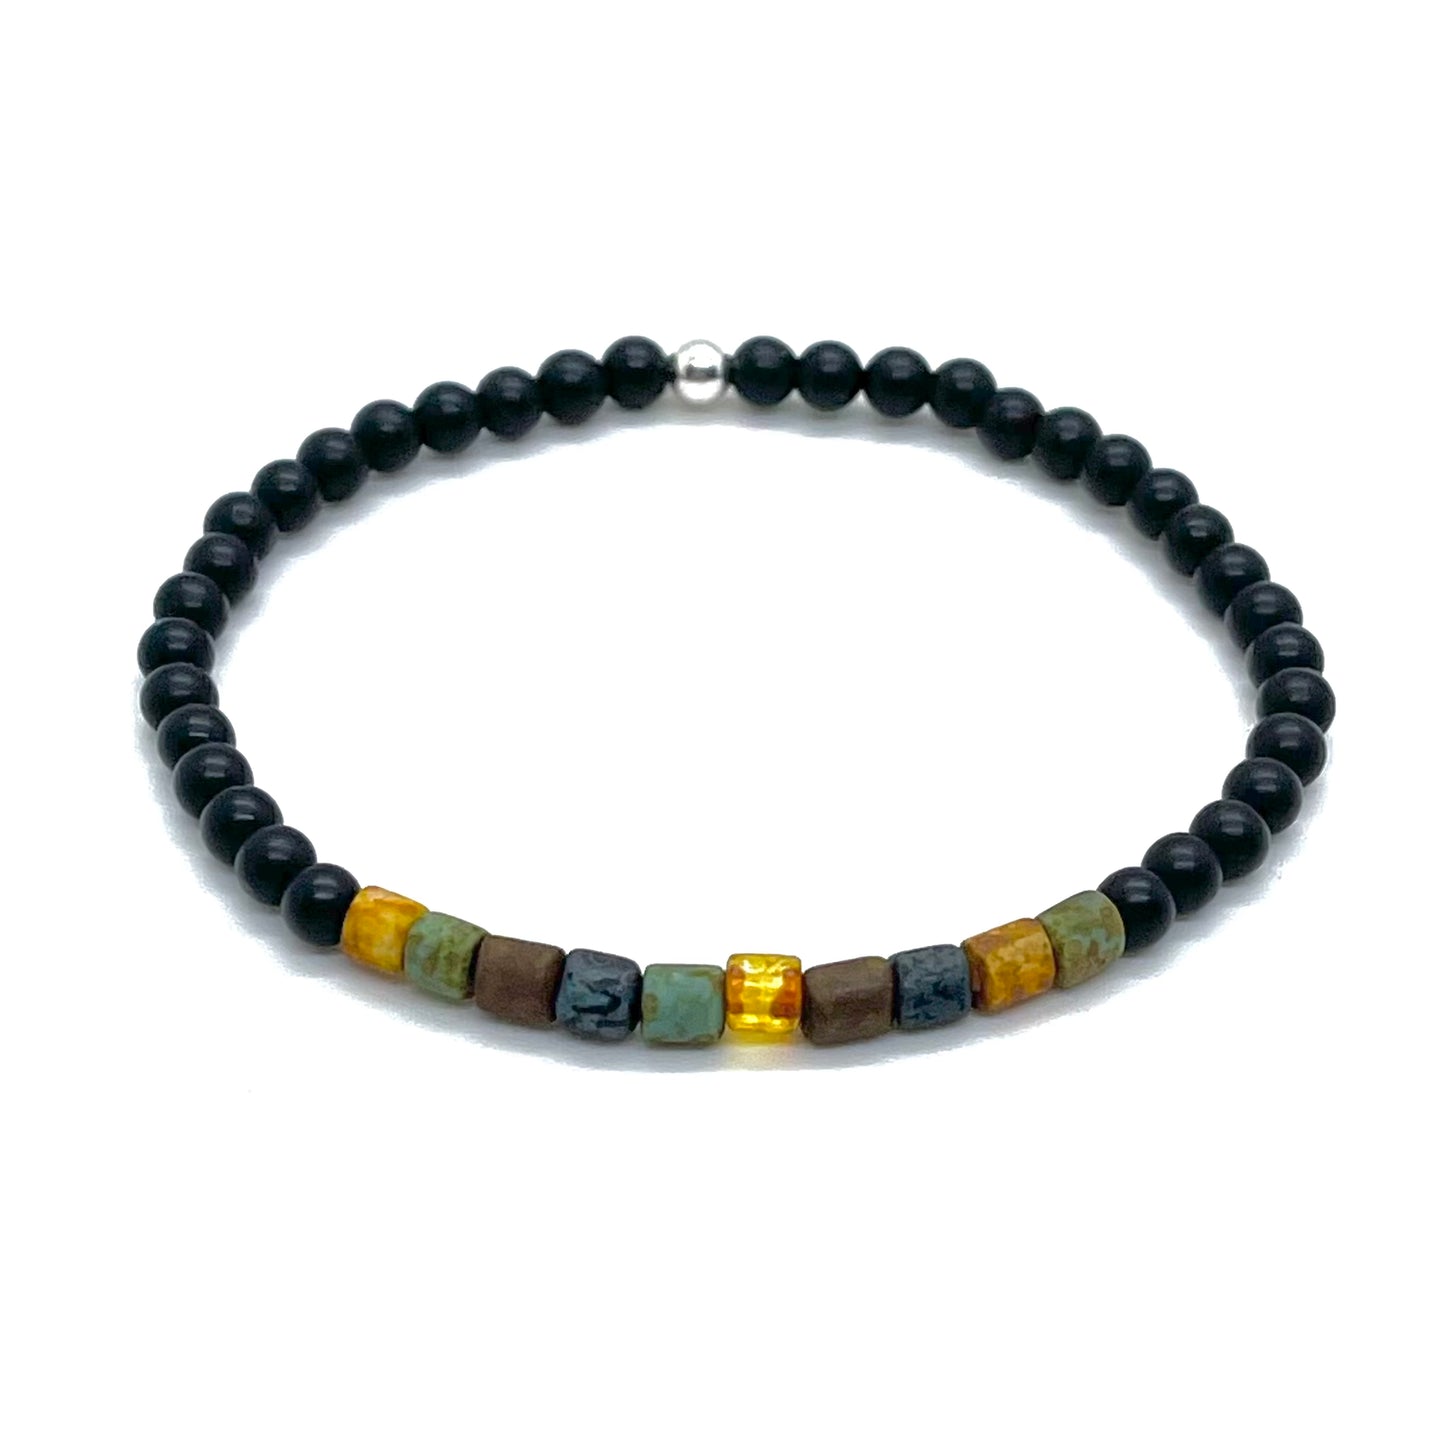 Mens black onyx rustic beaded bracelet with earthy tone matte speckled beads on elastic stretch.